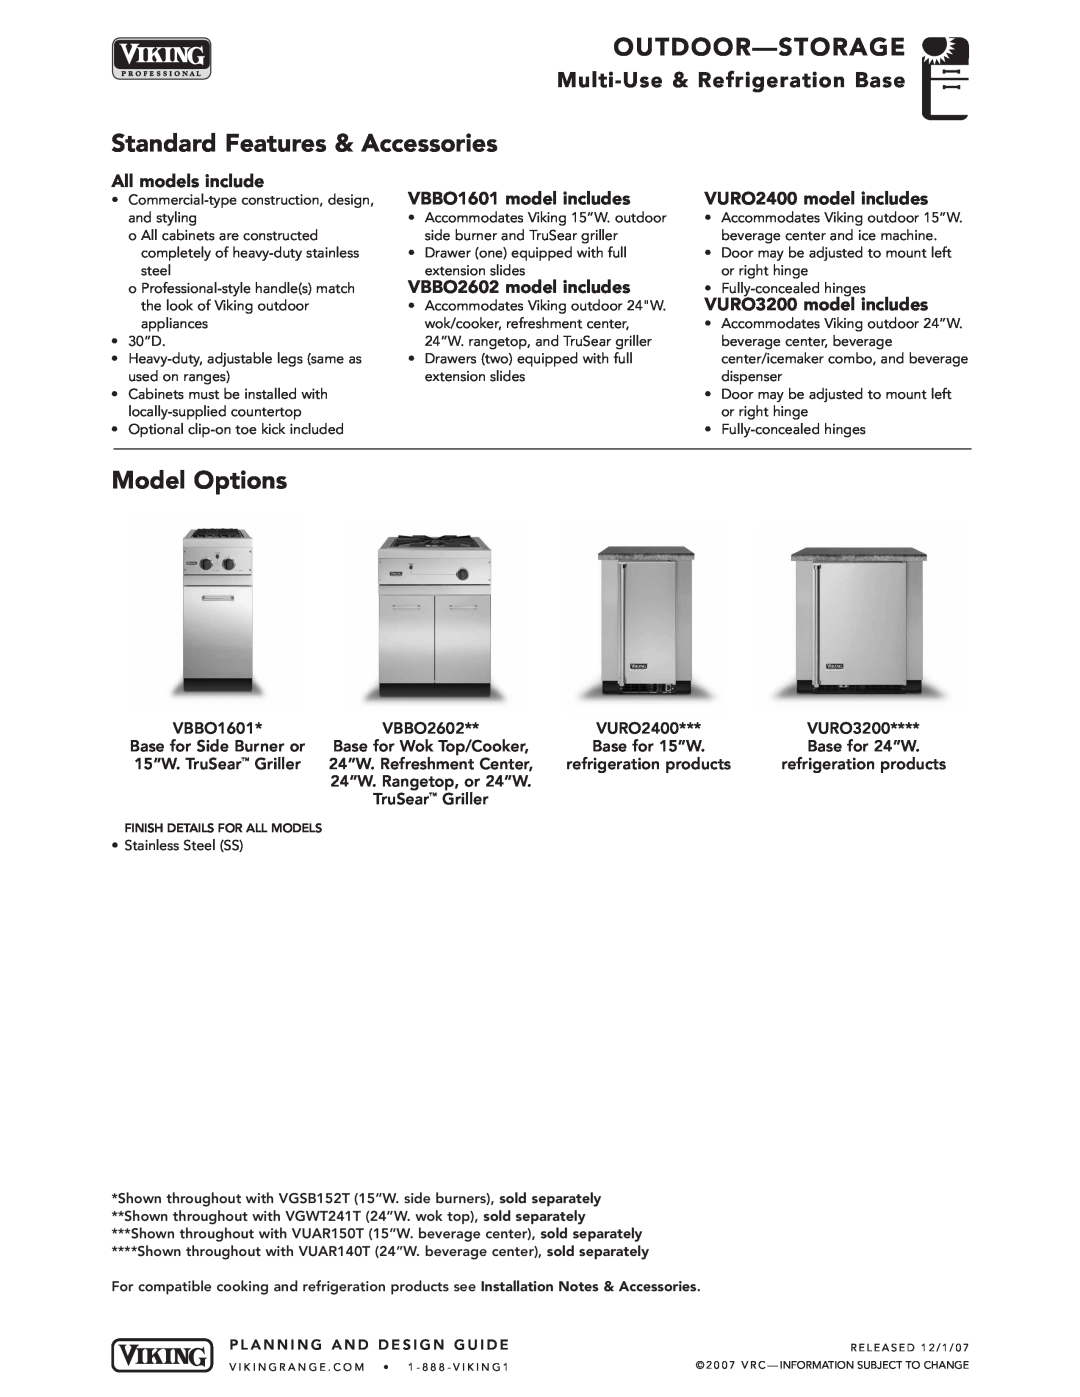 Viking VBBO2602 manual Outdoor-Storage, Standard Features & Accessories, Model Options, Multi-Use& Refrigeration Base 